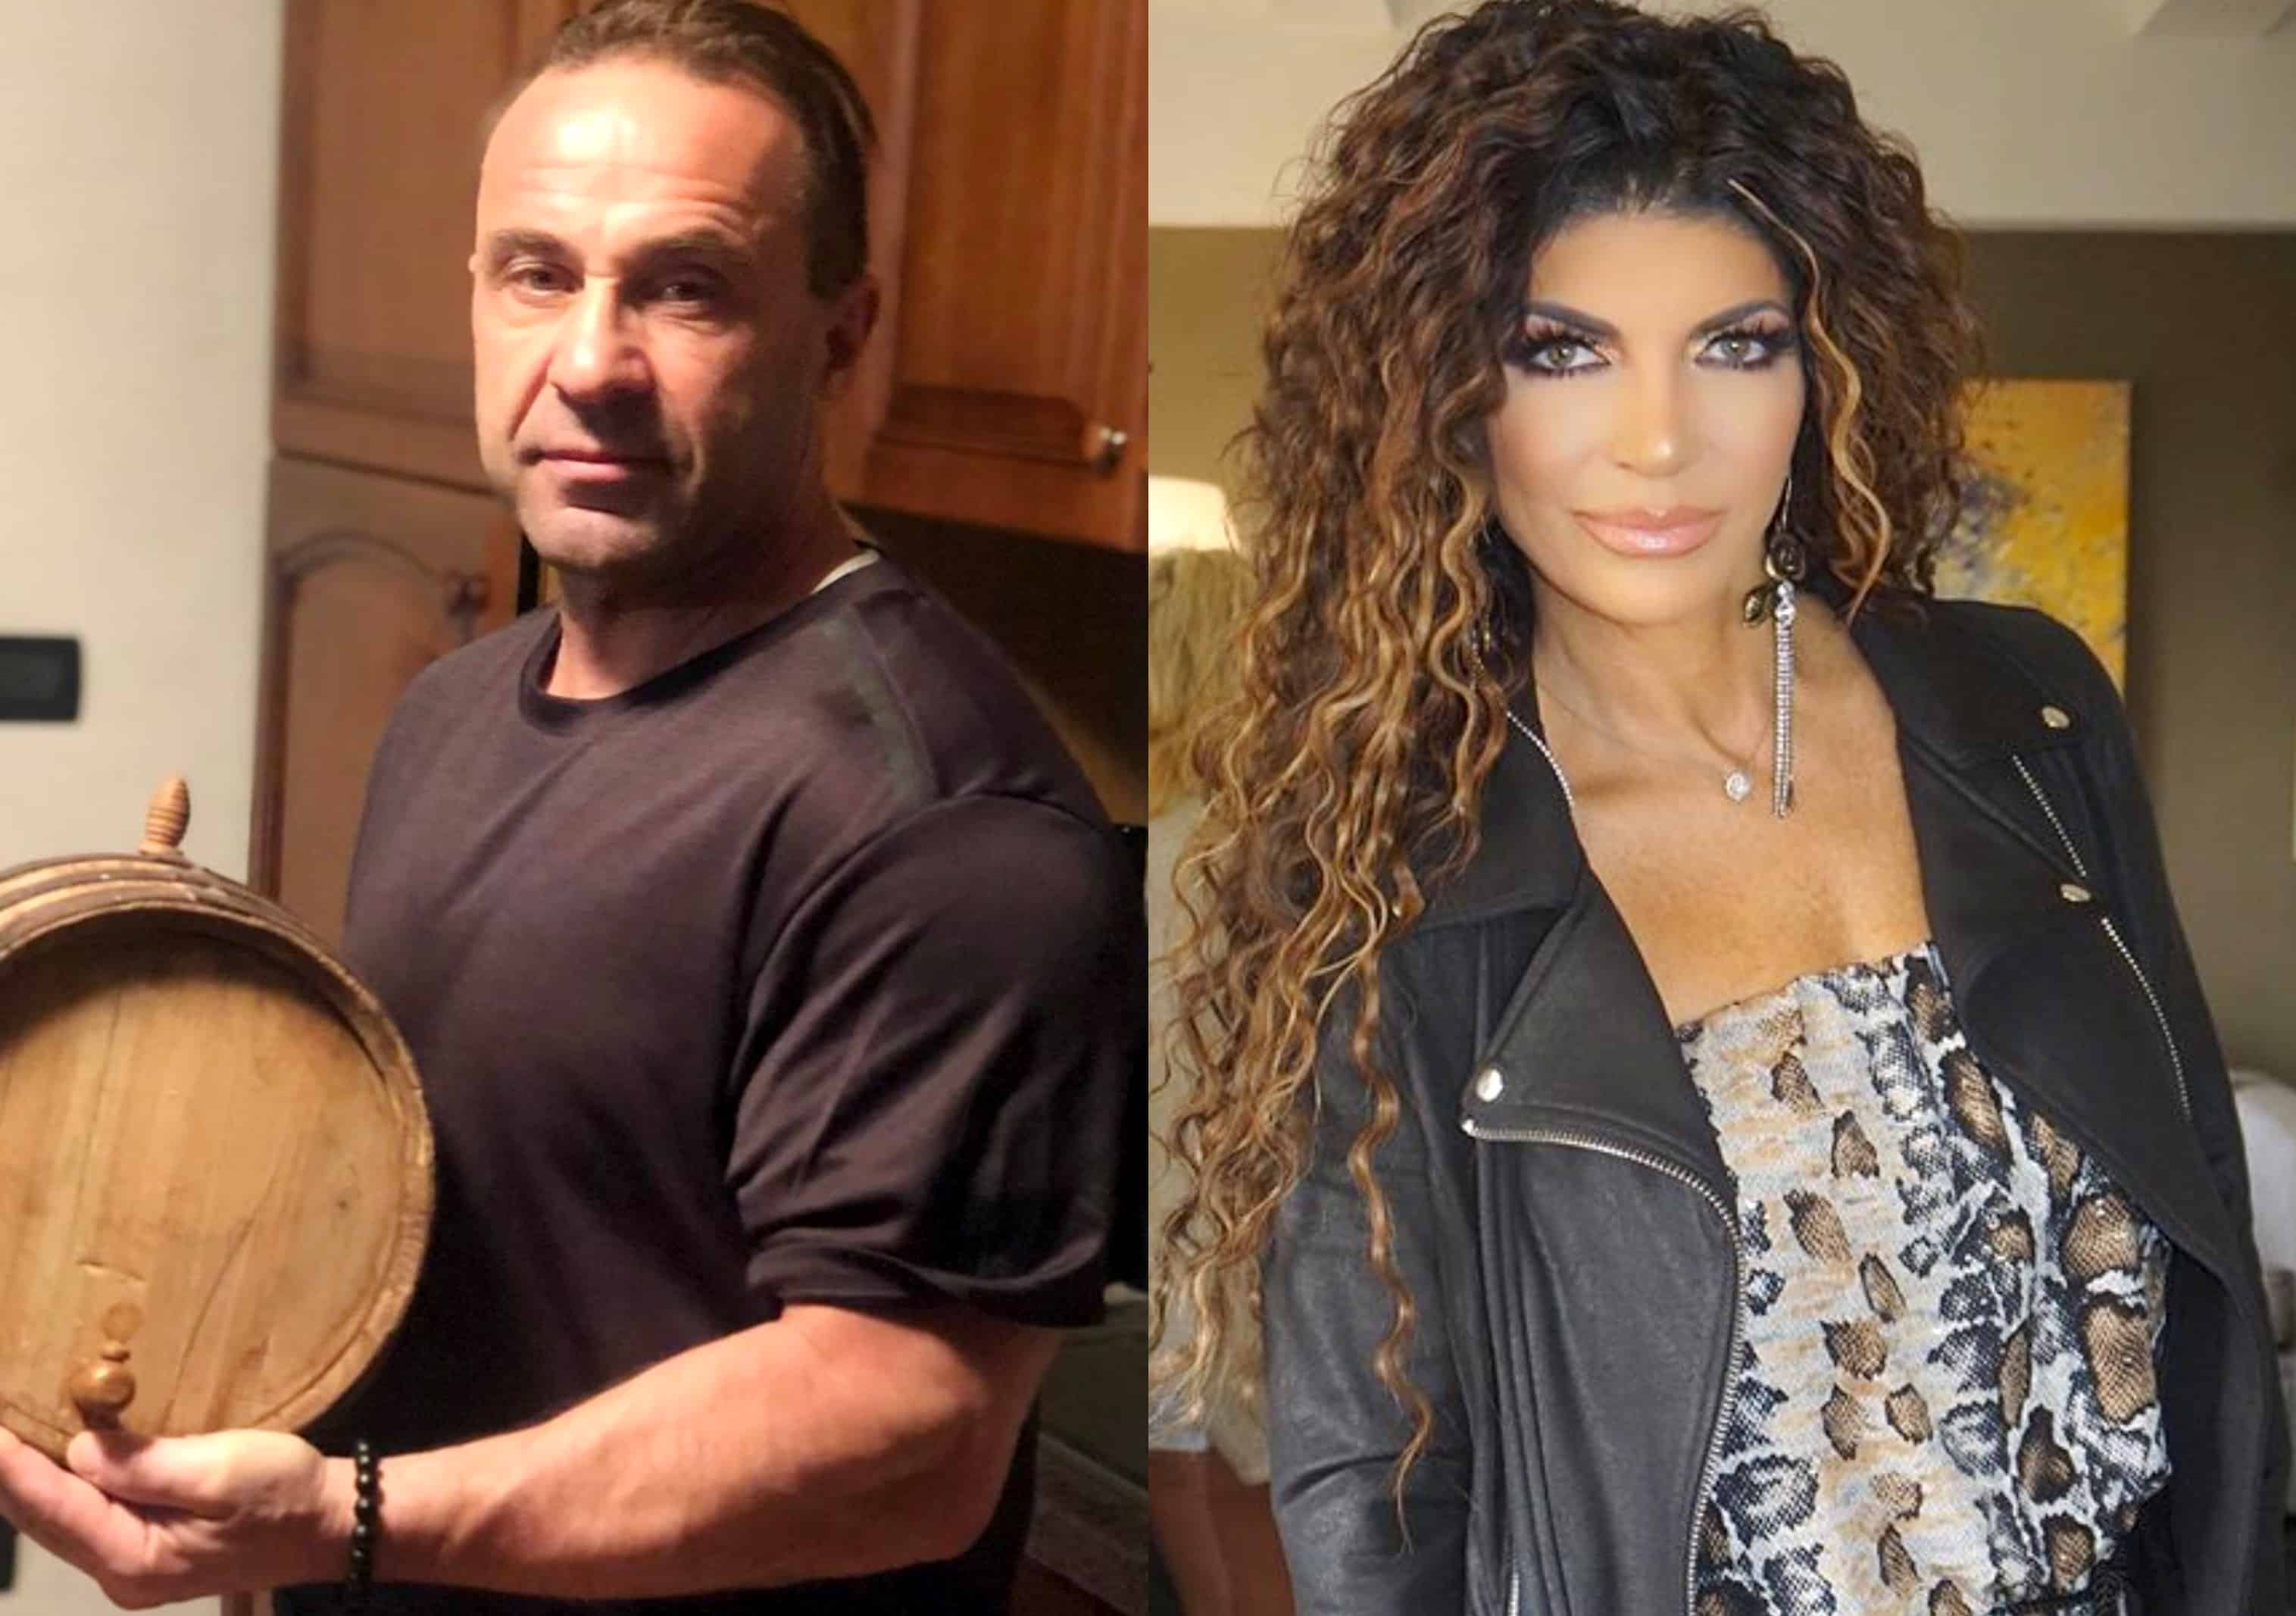 PHOTOS: See Pics of Joe Giudice's Home in Italy as RHONJ Star Gives Fans a Tour of His Humble Apartment, Plus He Leaves More Flirty Comments for Wife Teresa Giudice and Reveals Plans to Start Working